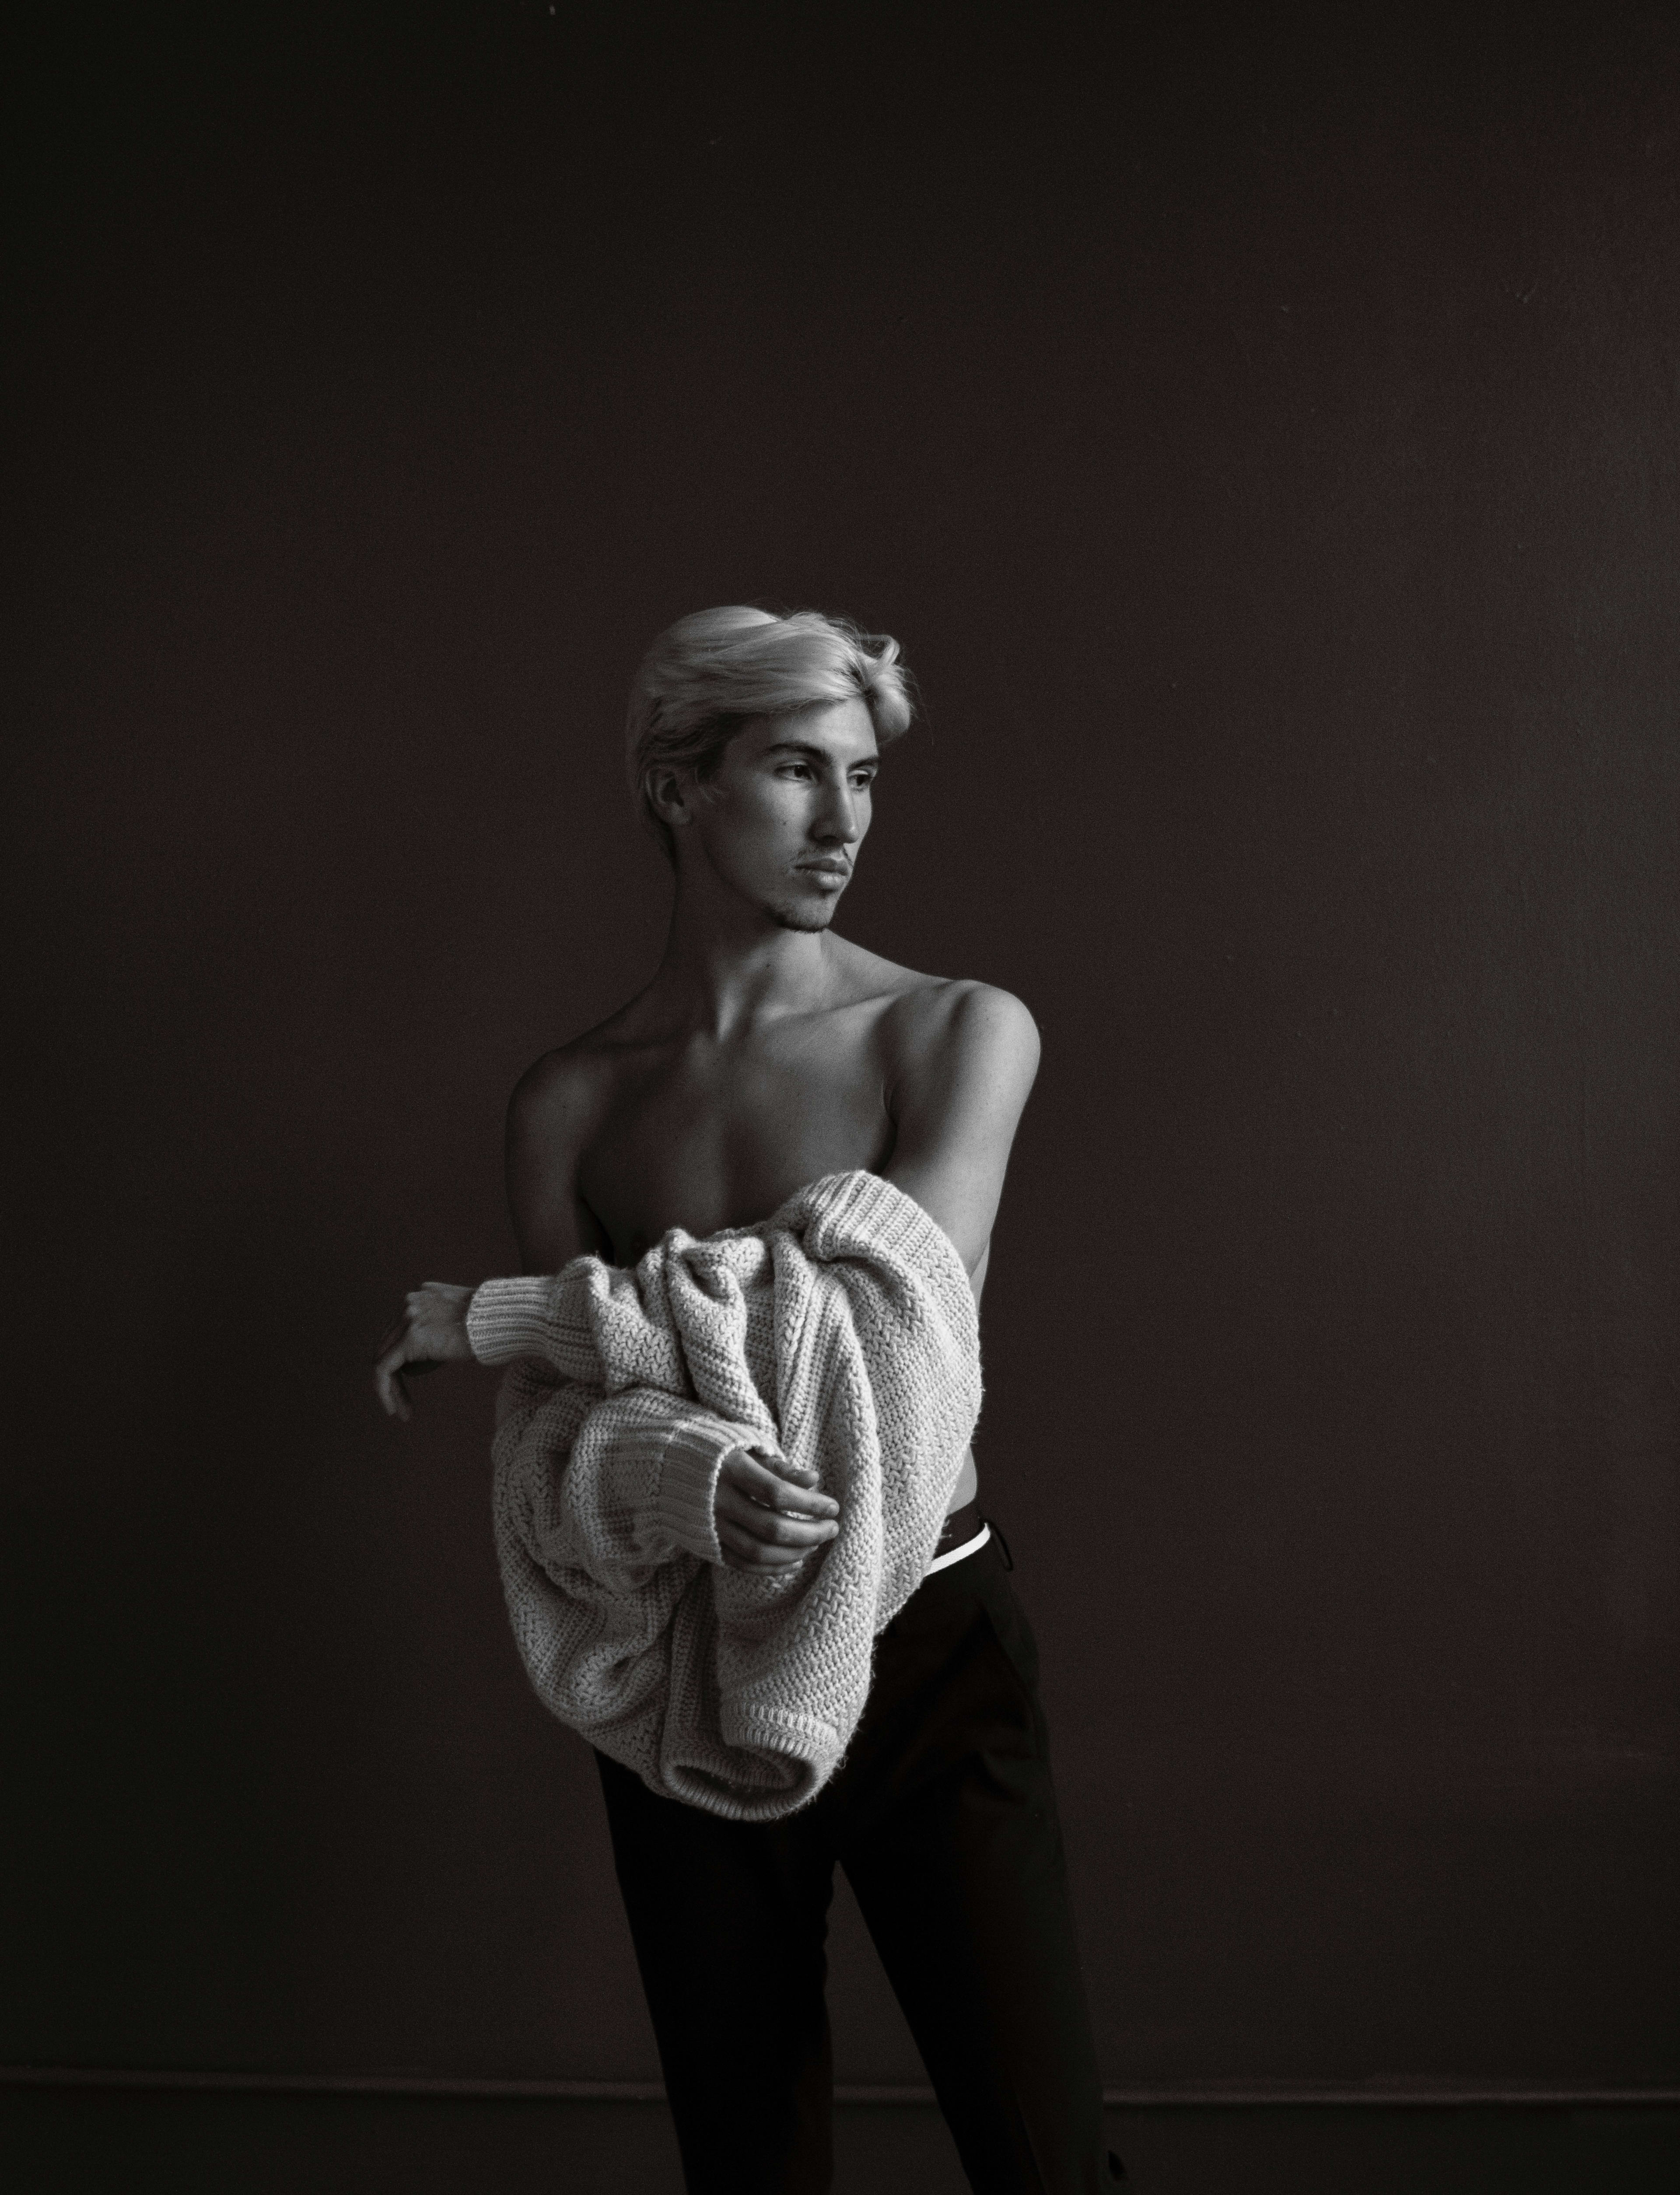 A black and white fashion photoshoot featuring a person holding a towel.